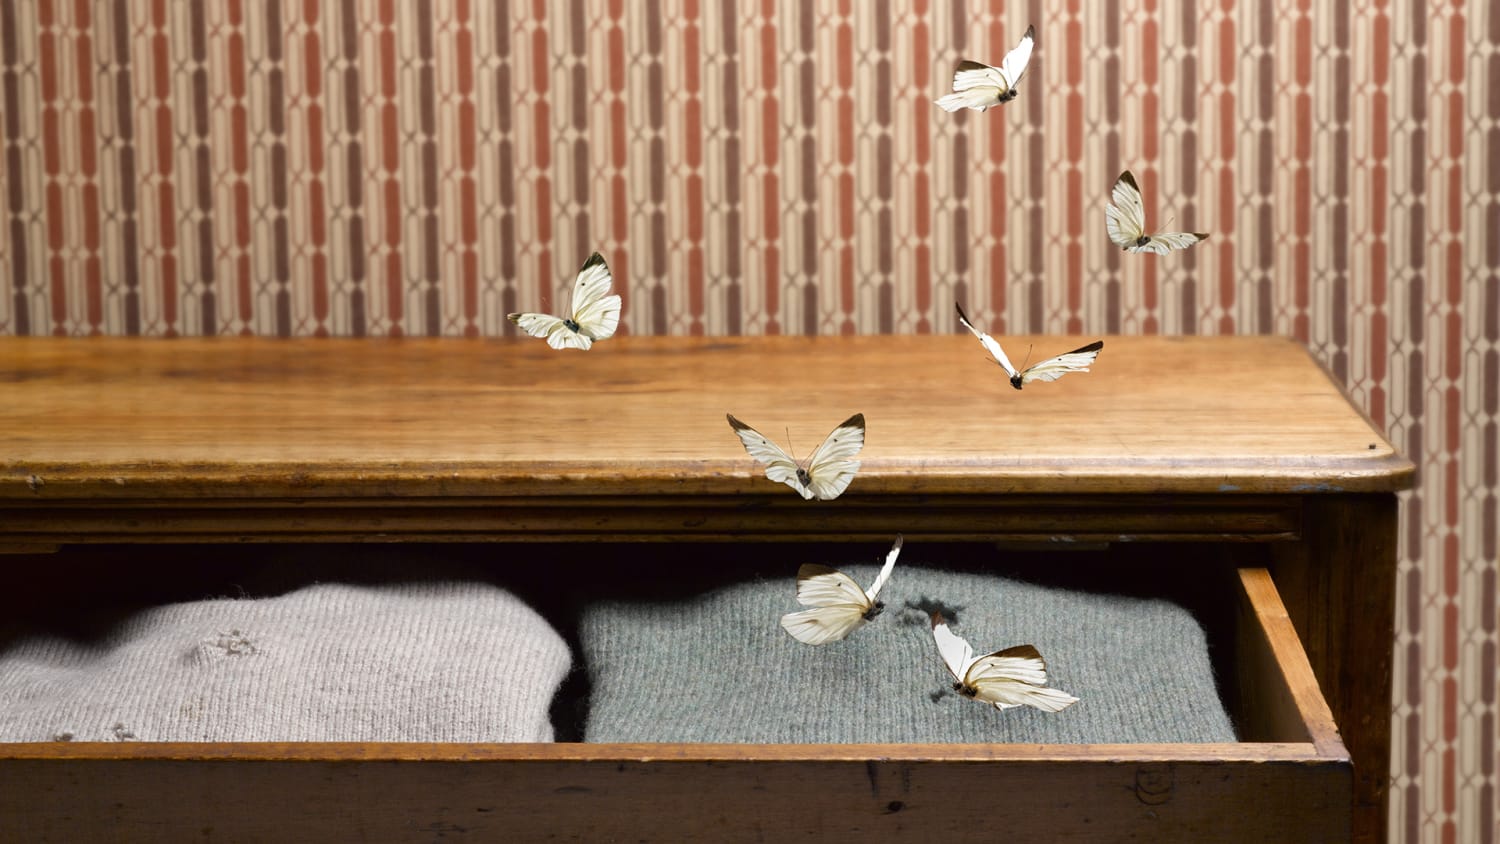 How can I avoid moths getting into my wardrobe? 